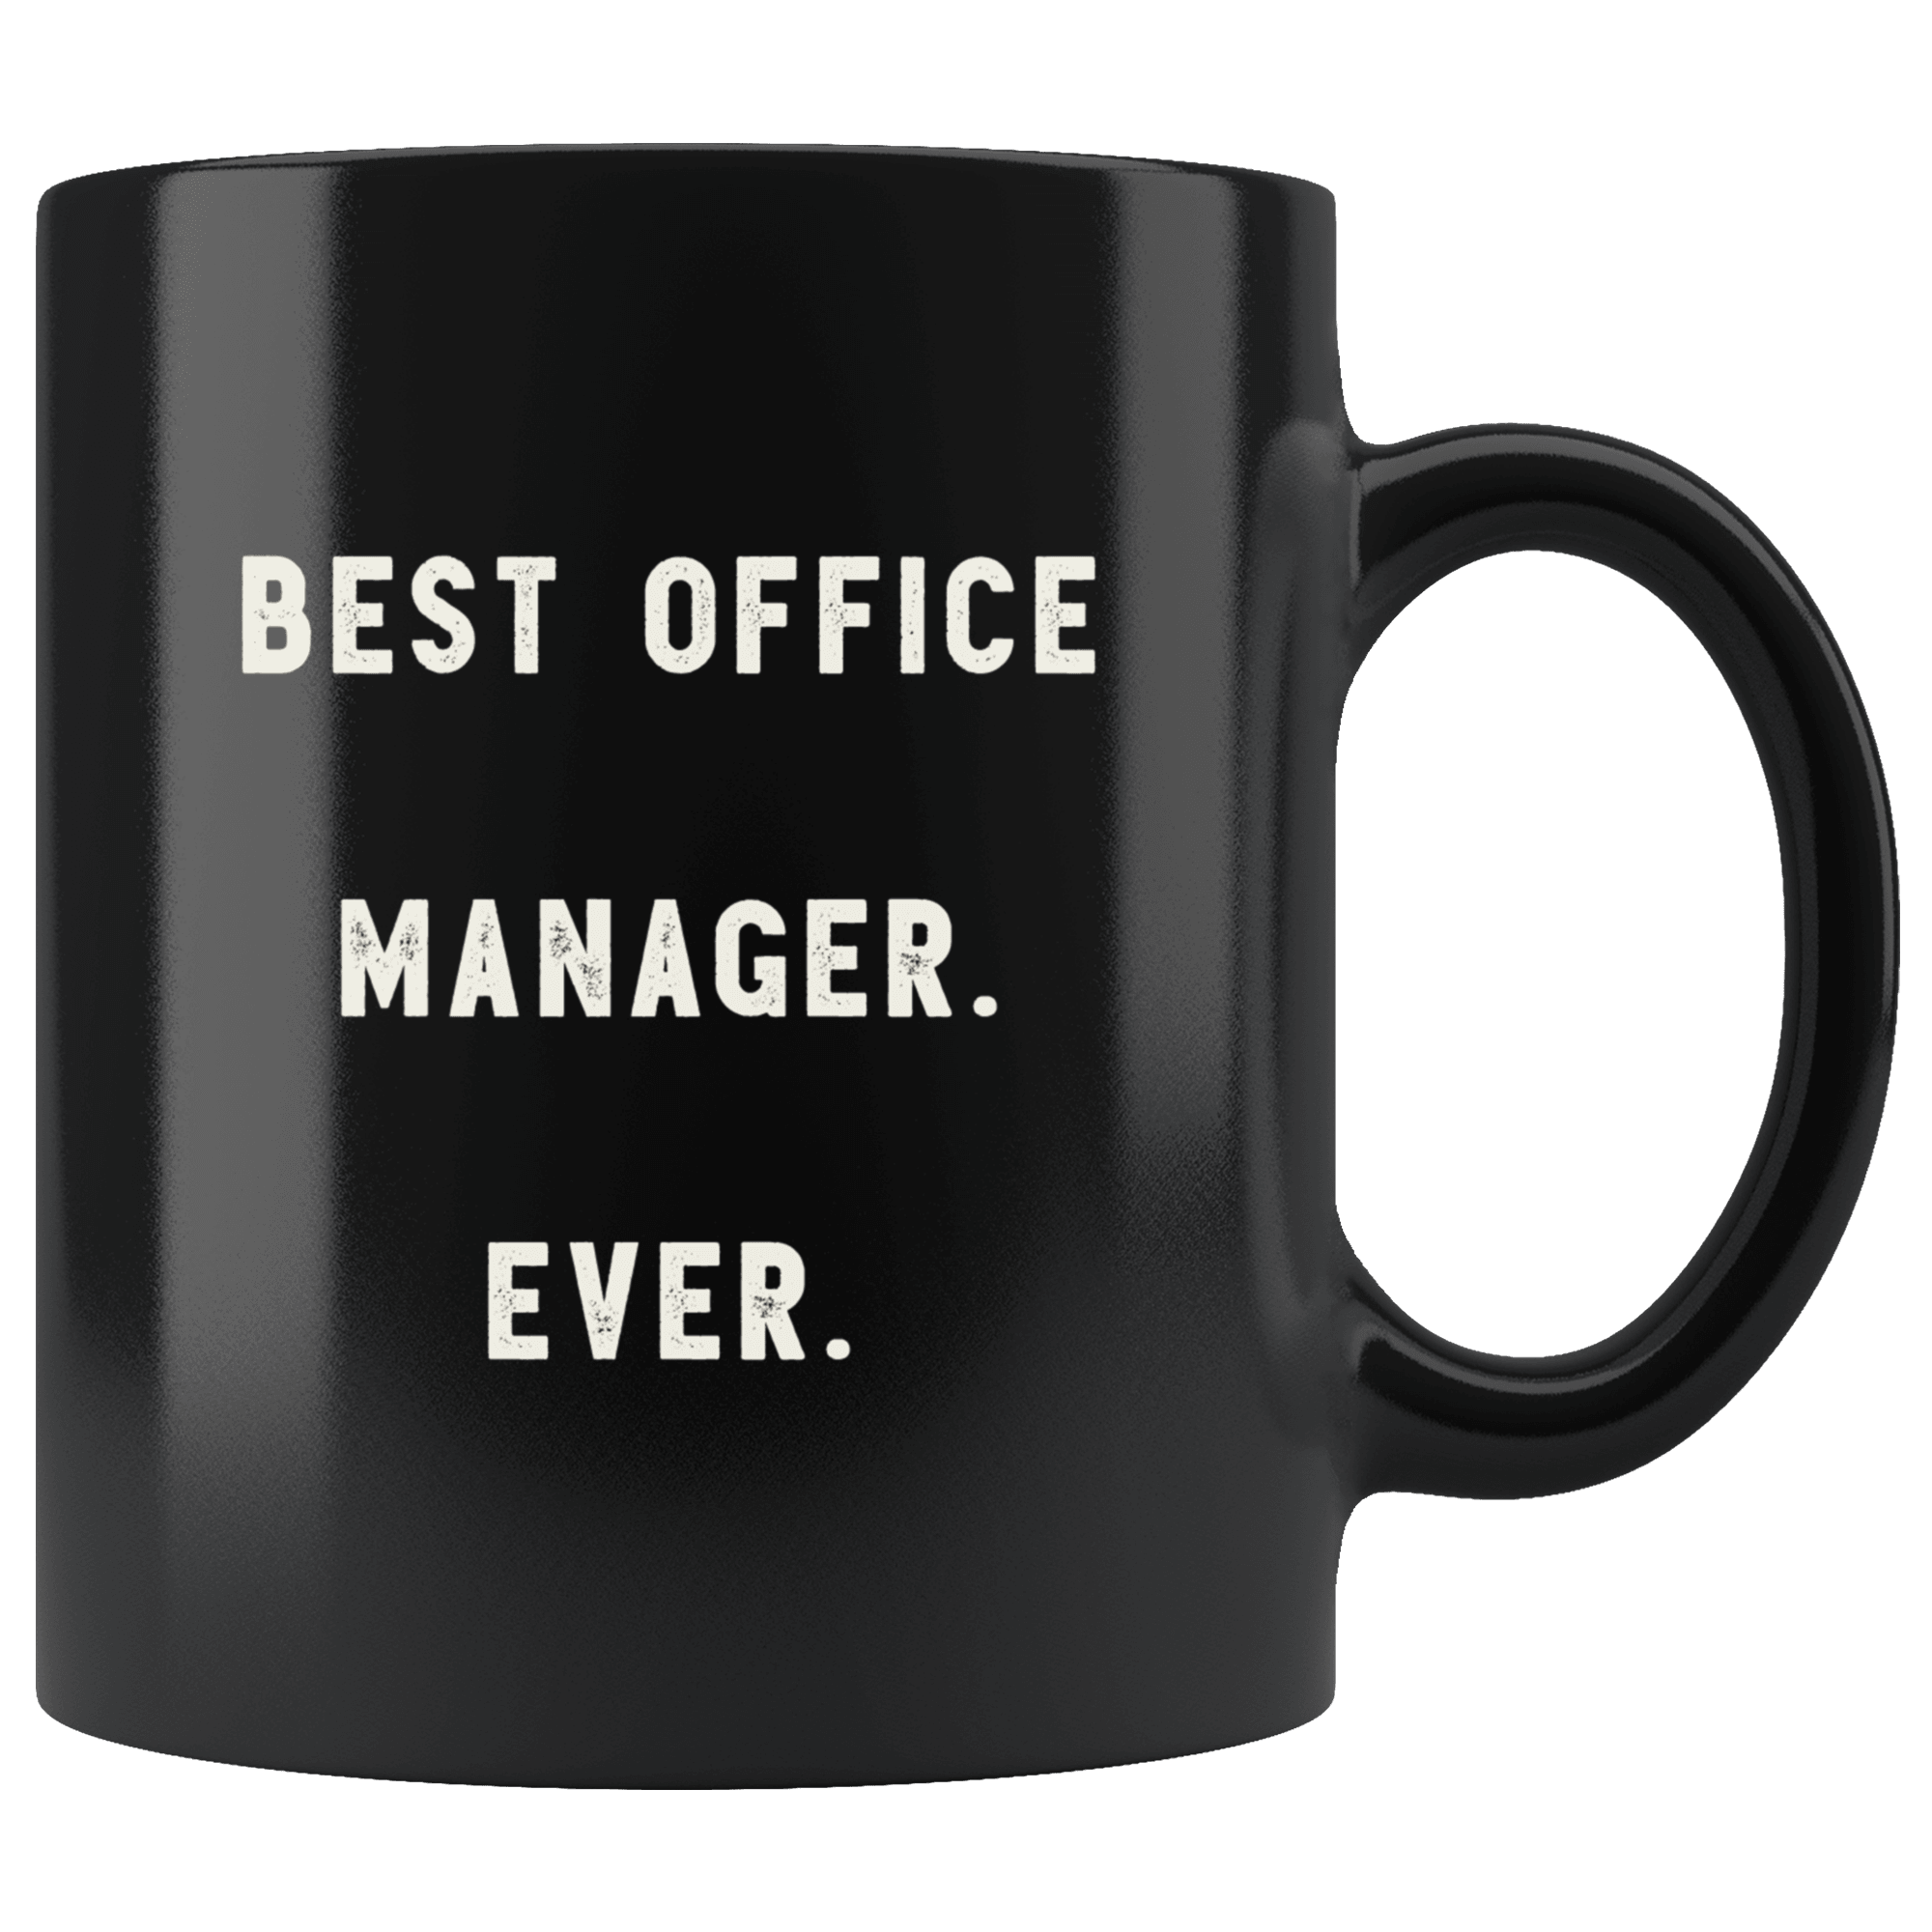 Amazon.com: LukieJac Best Boss Lady Gifts for Women Boss Birthday Gifts  Appreciation Gifts Promotion Gifts Mentor Gifts for Women Boss Lady Office  Desk Decor Boss Day Decorations Female Managers Office Sign :